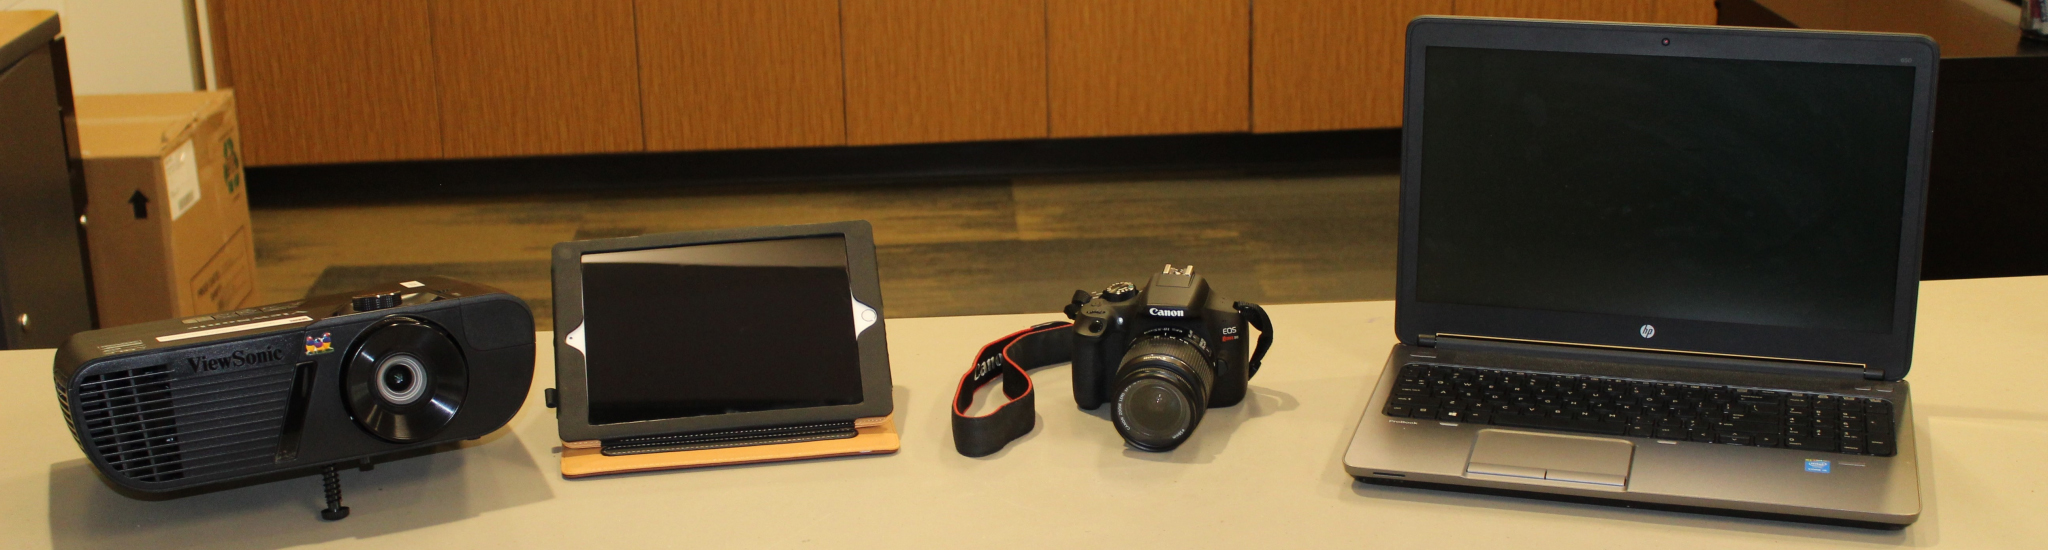 A laptop, camera, iPad, and projector available for rent from IT Equipment Rental